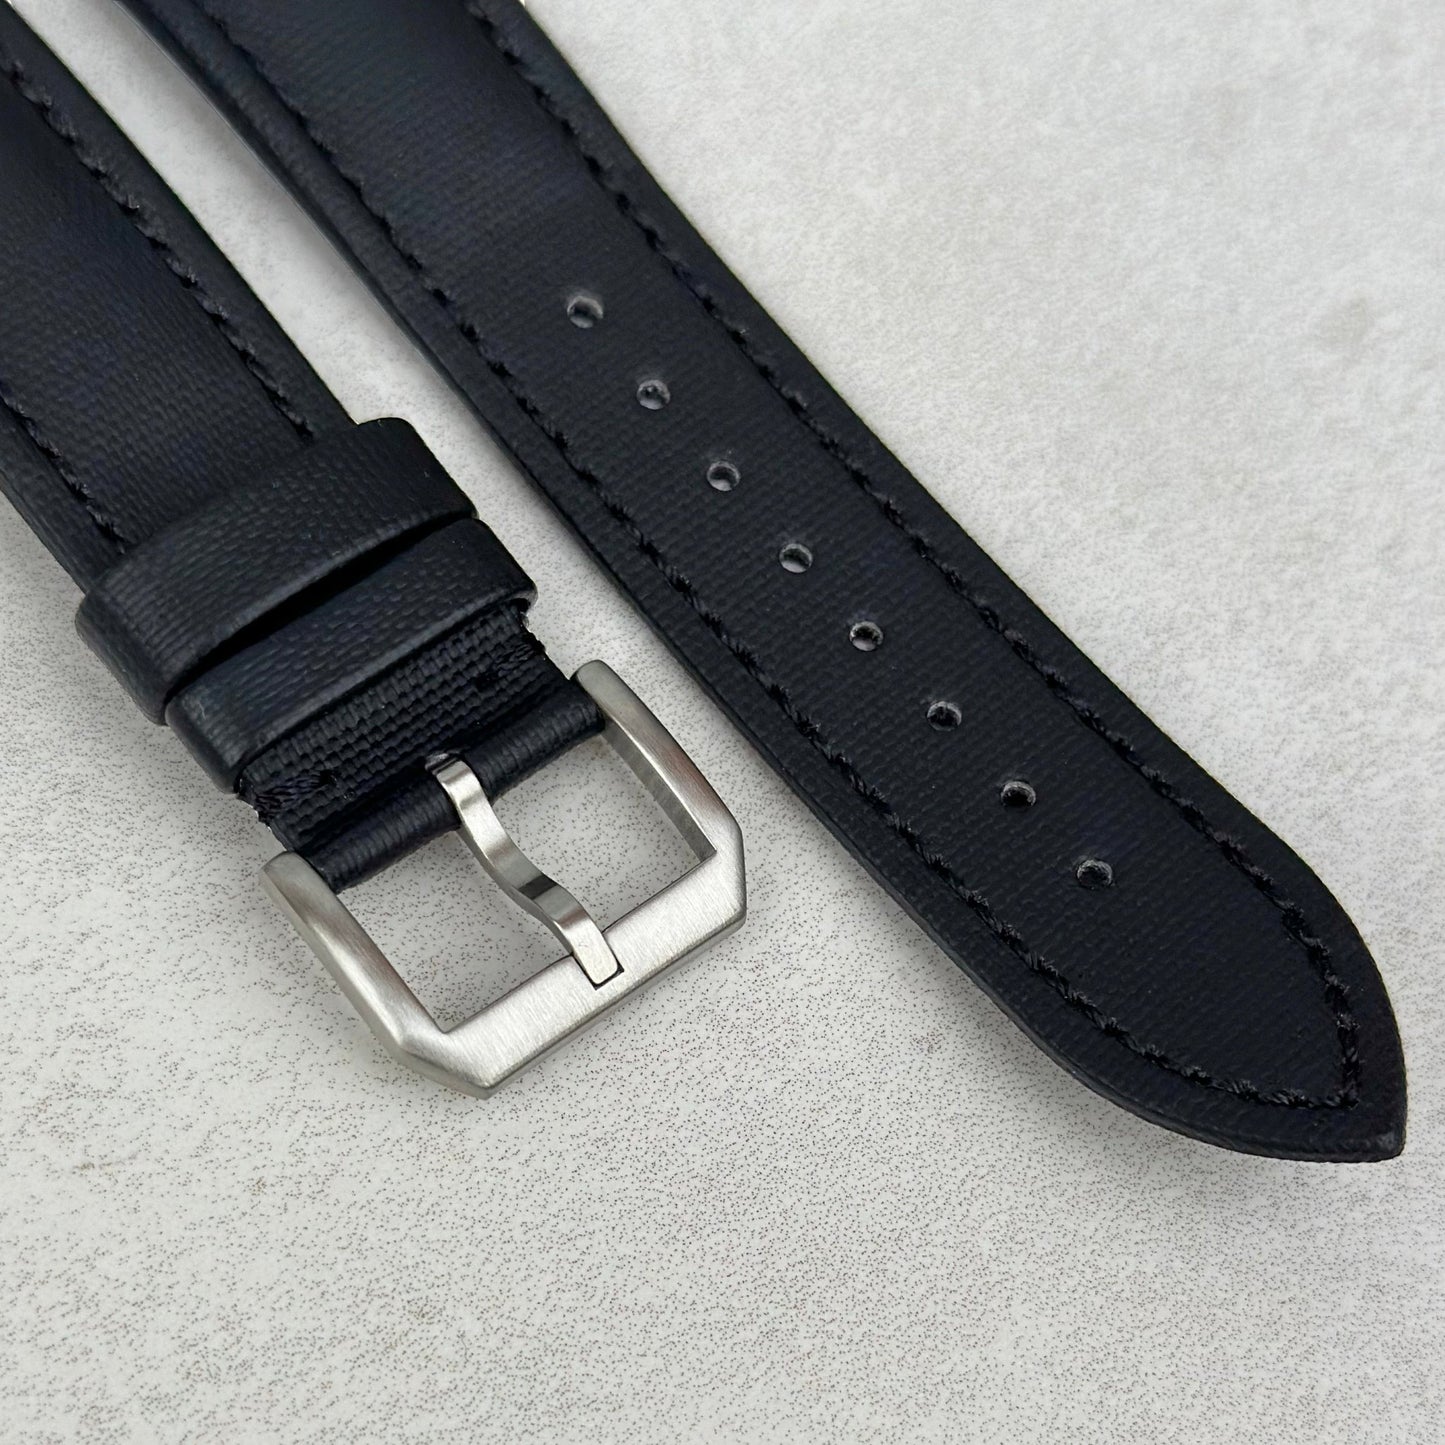 Brushed 316L stainless steel buckle on the Bermuda jet black sail cloth Apple Watch strap. Watch And Strap